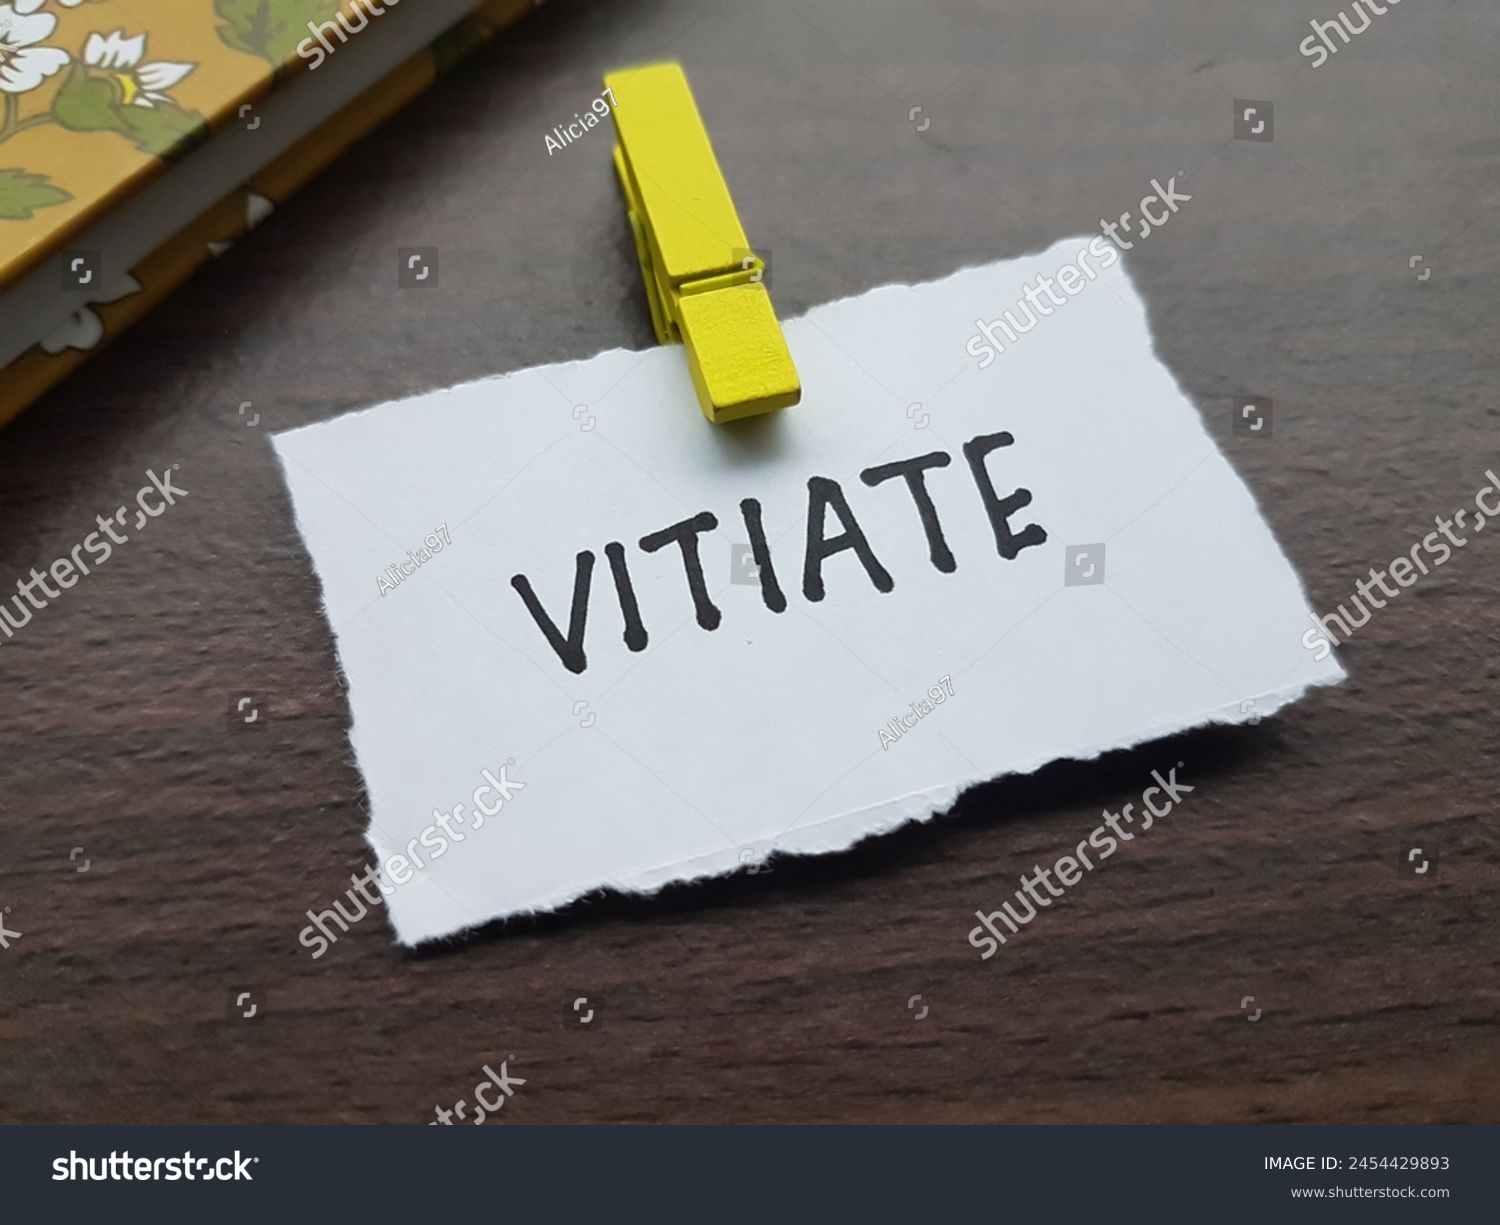 Vitiate writting on table background. #2454429893